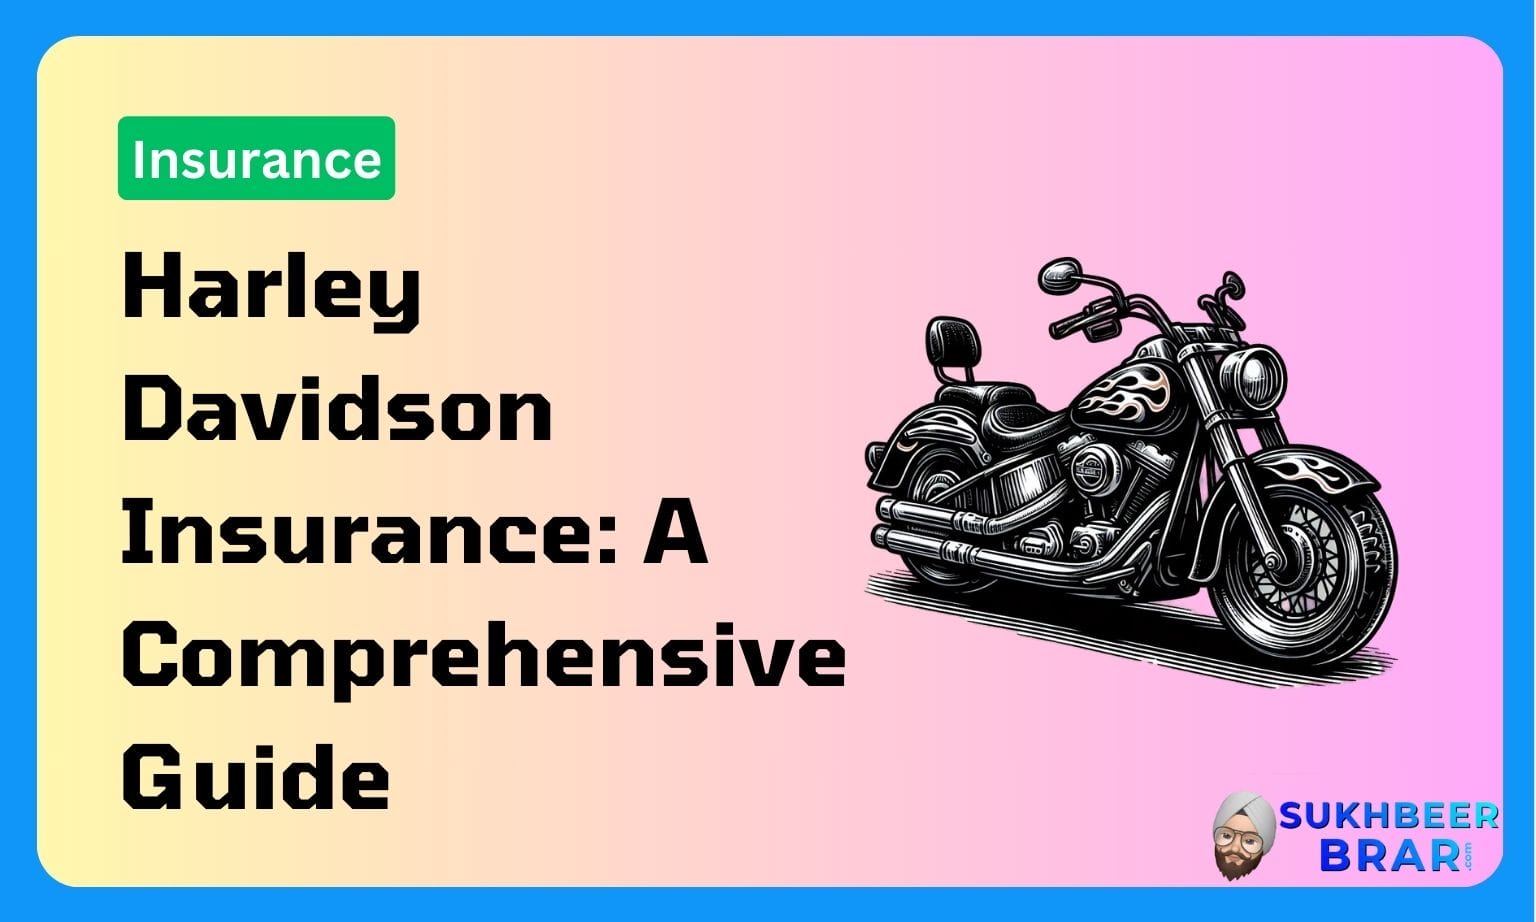 Read more about the article Harley Davidson Insurance: A Comprehensive Guide